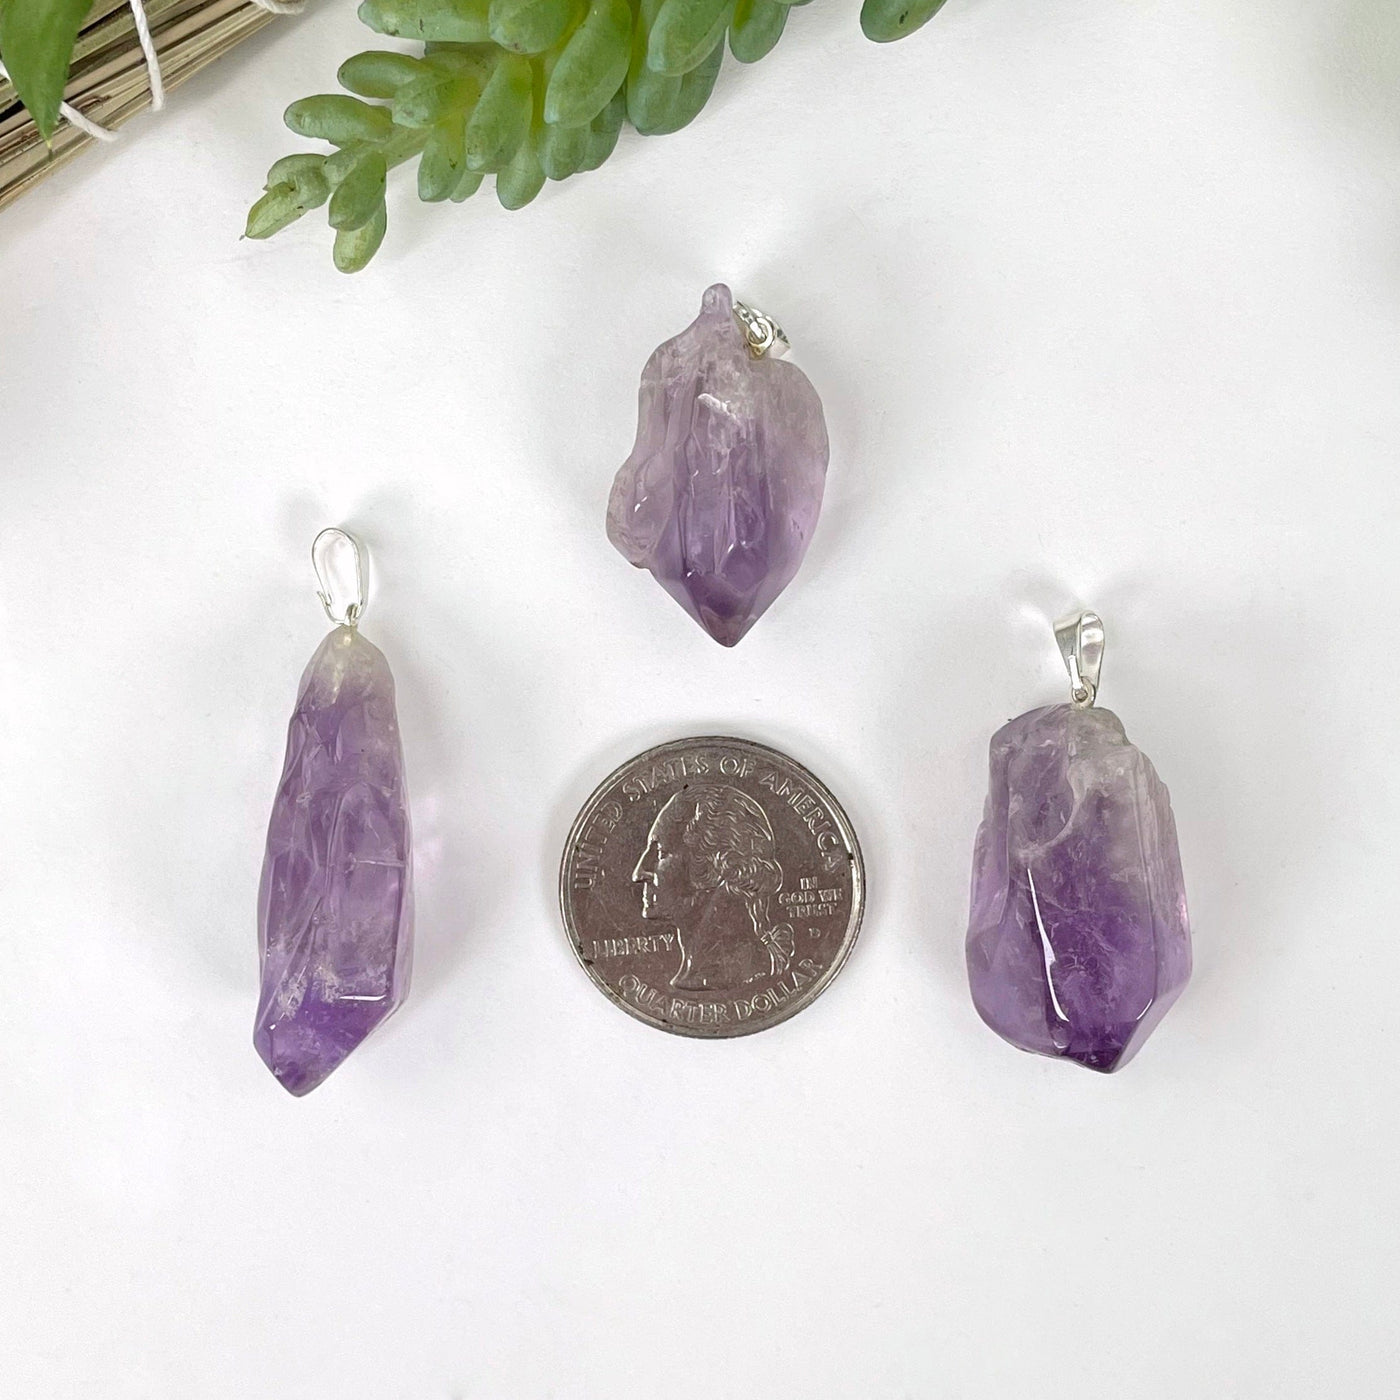 three tumbled amethyst pendants on white background with quarter for size reference